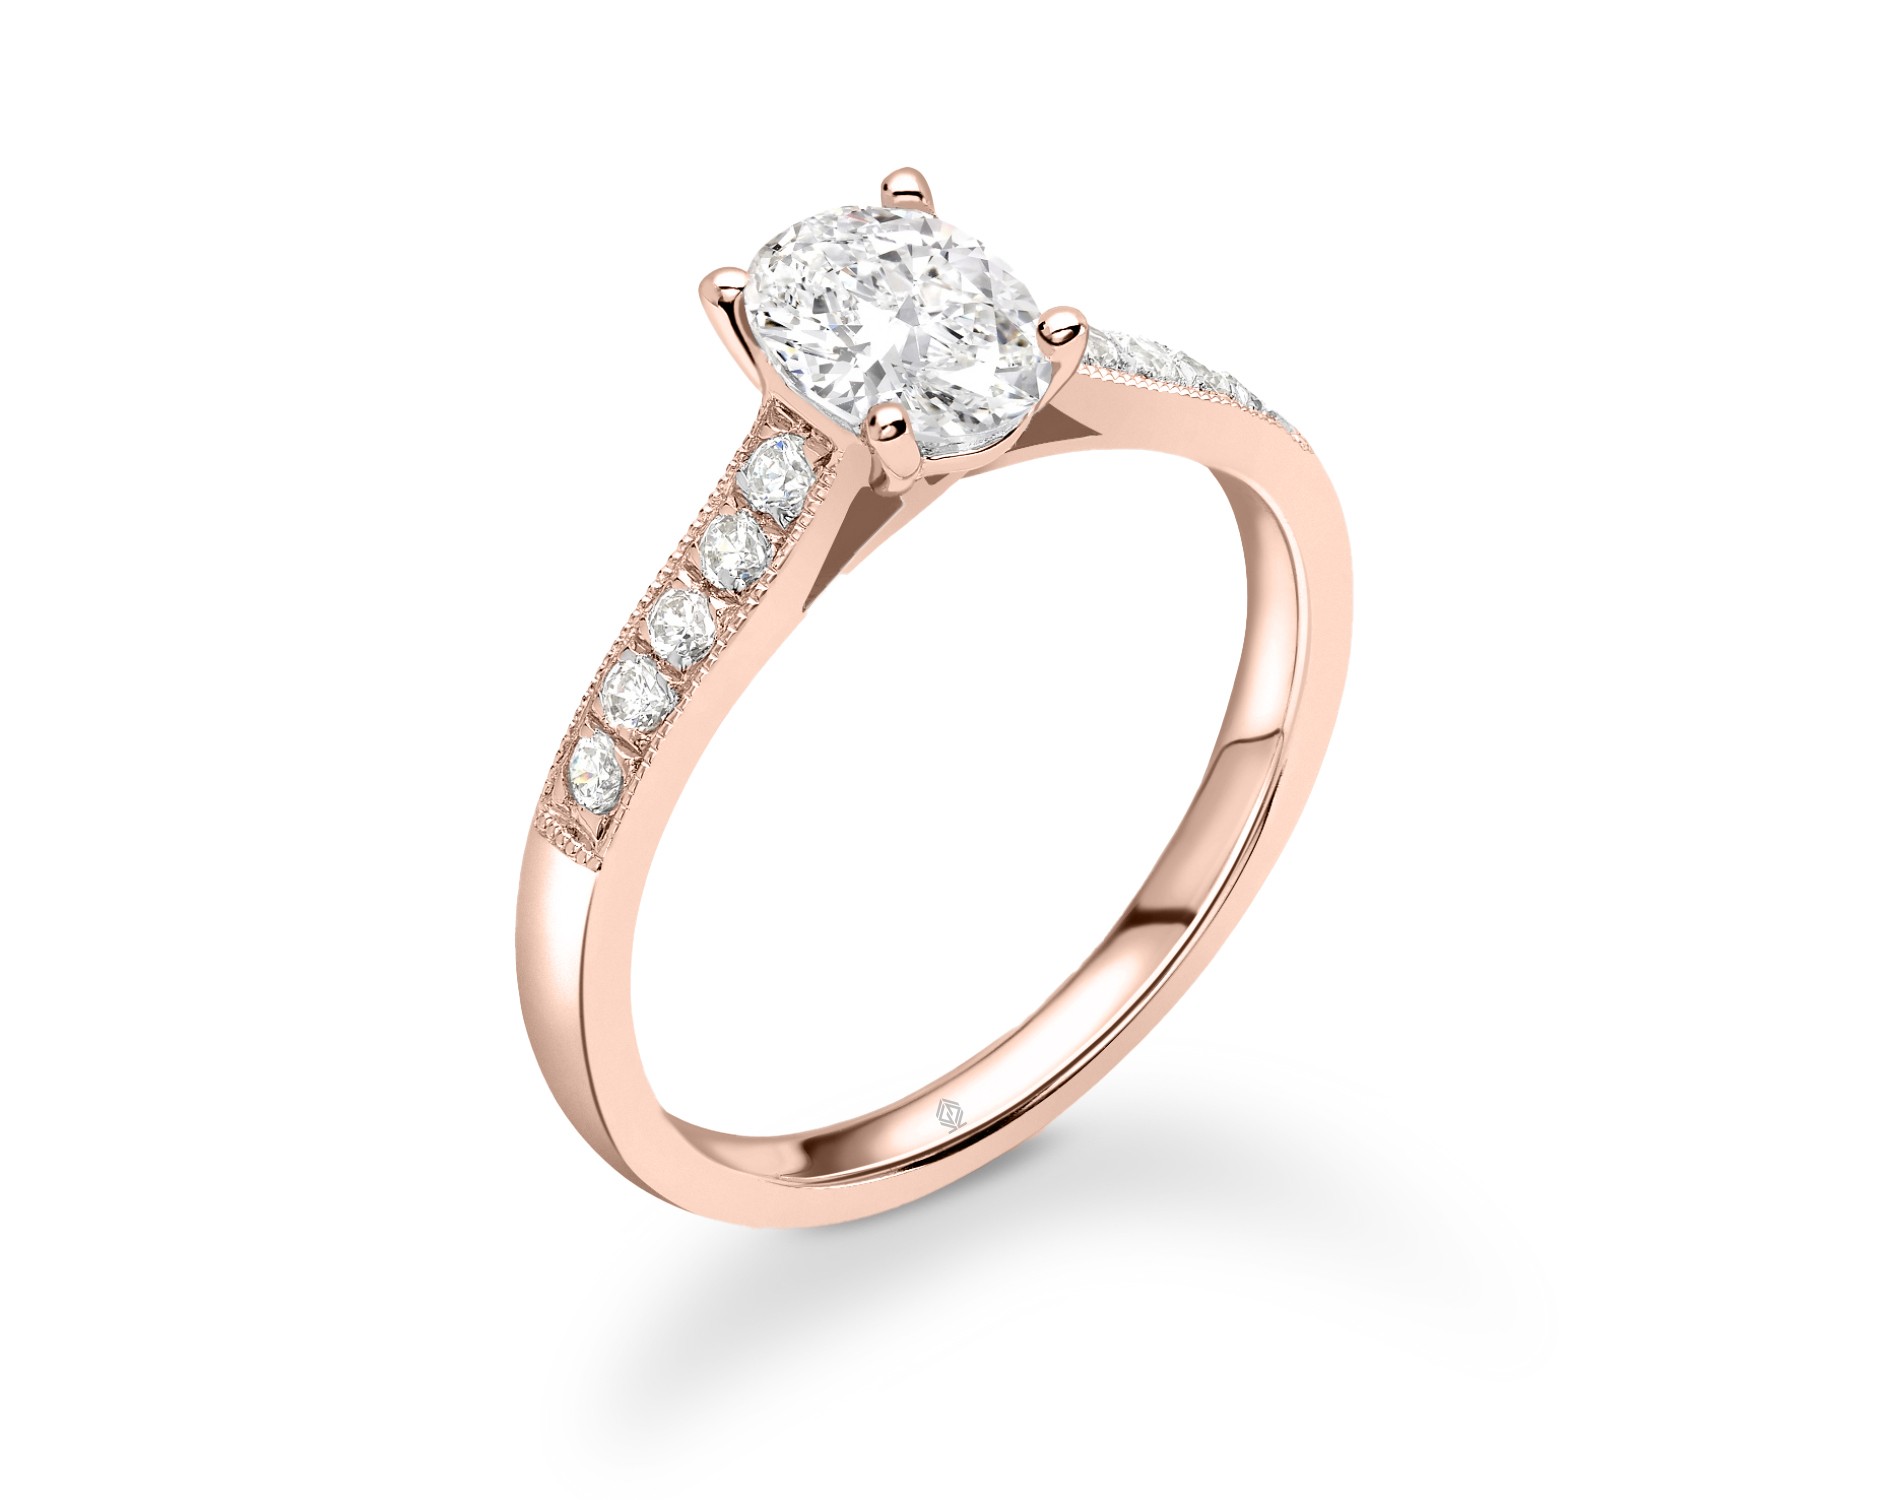 18K ROSE GOLD OVAL CUT DIAMOND ENGAGEMENT RING WITH SIDE STONES MILGRAIN CHANNEL SET